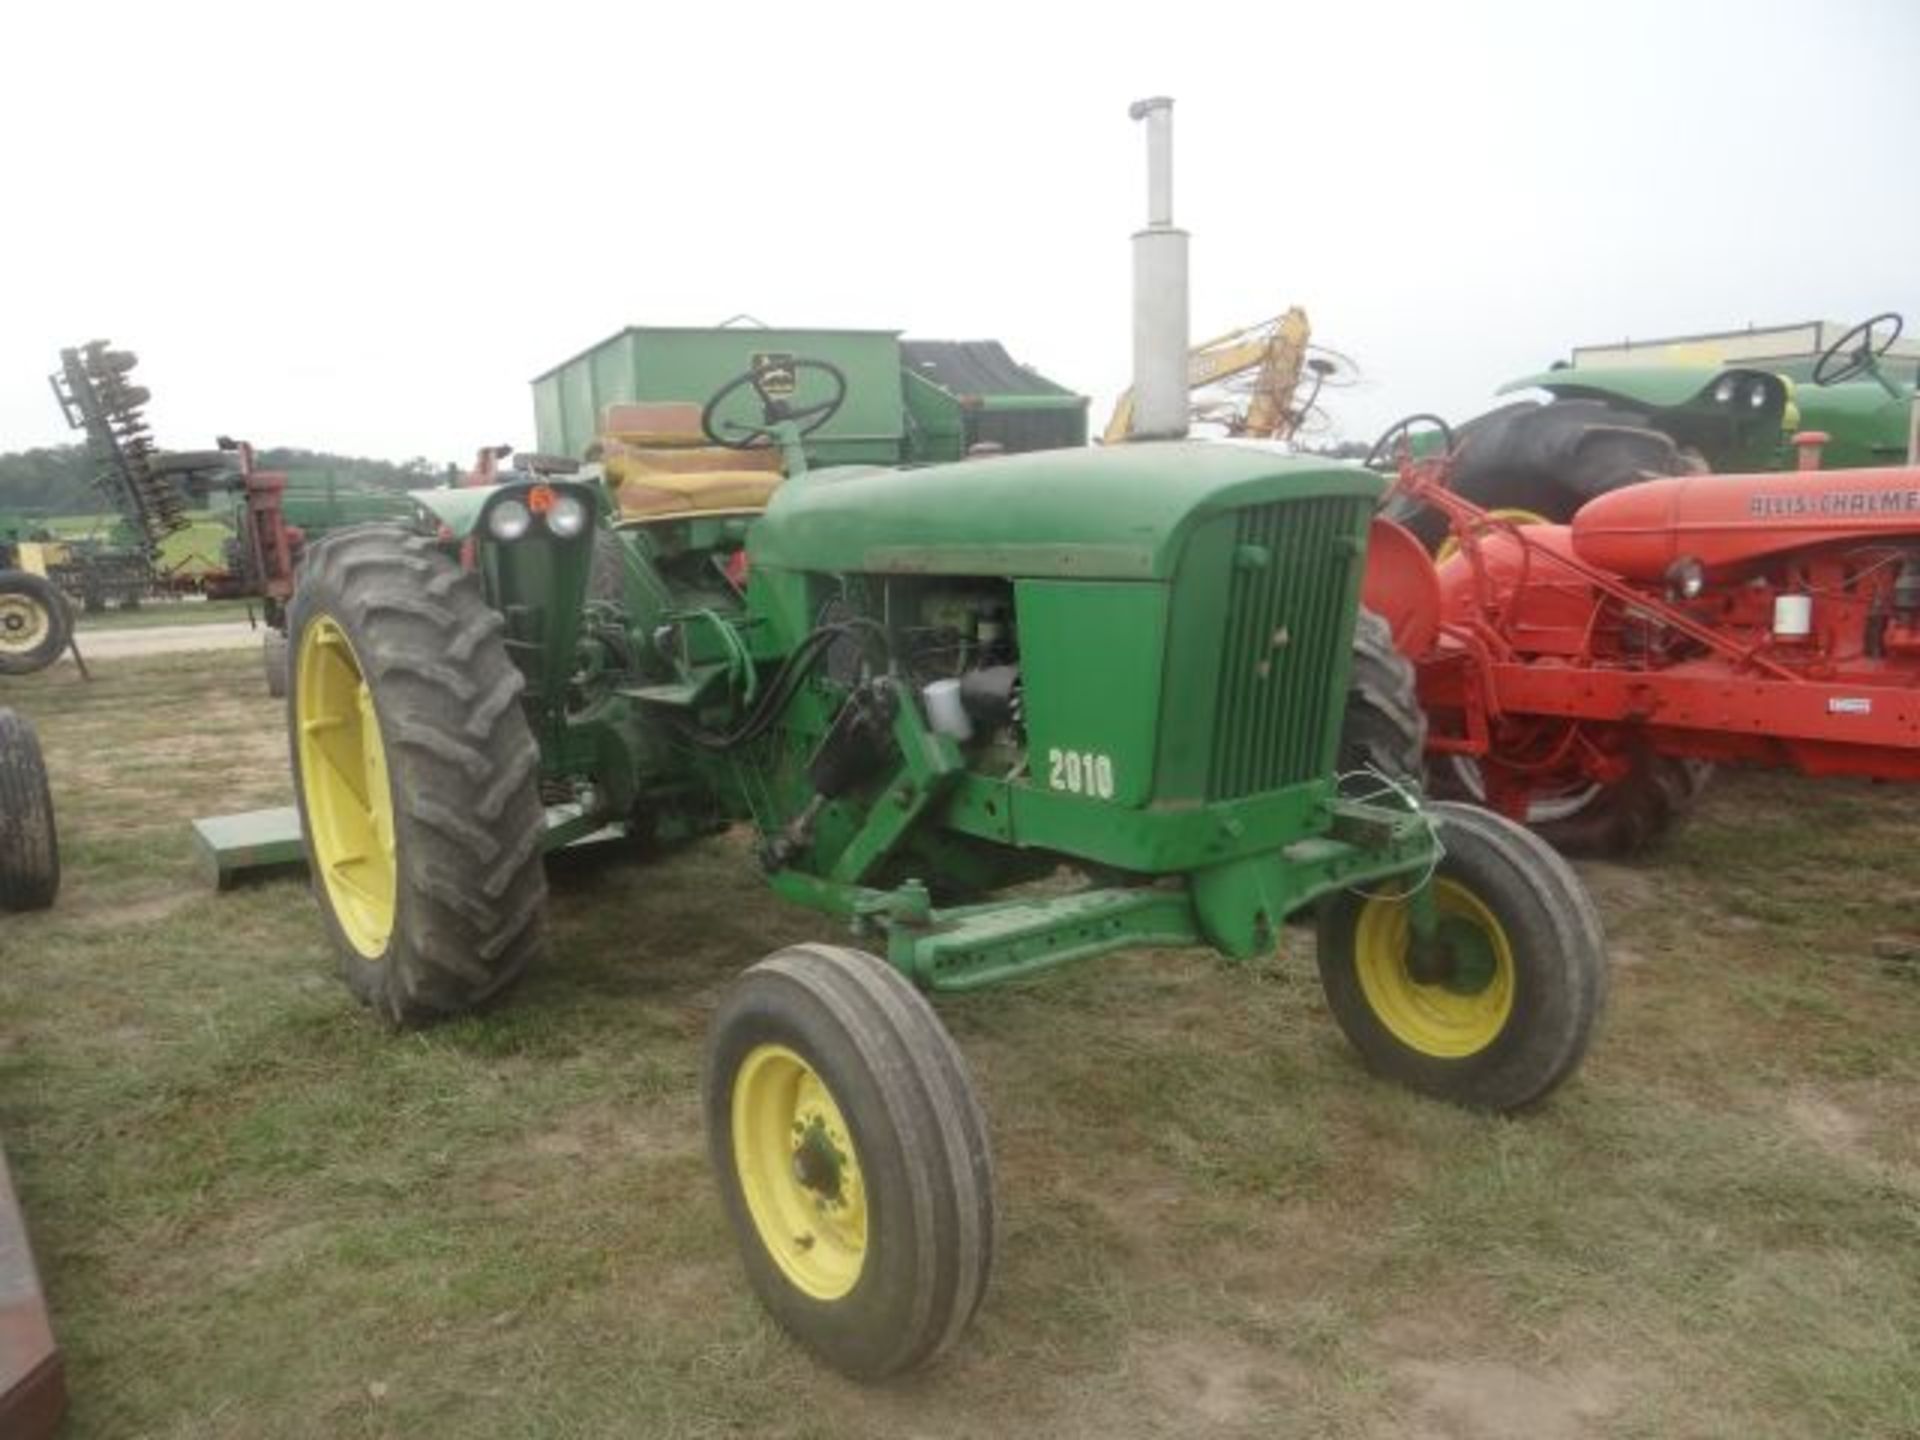 JD 2010 Tractor Gas, Row Crop, WF, Syncro, 3pt, 13.9x36 Tires, w/Mid Mount Mower